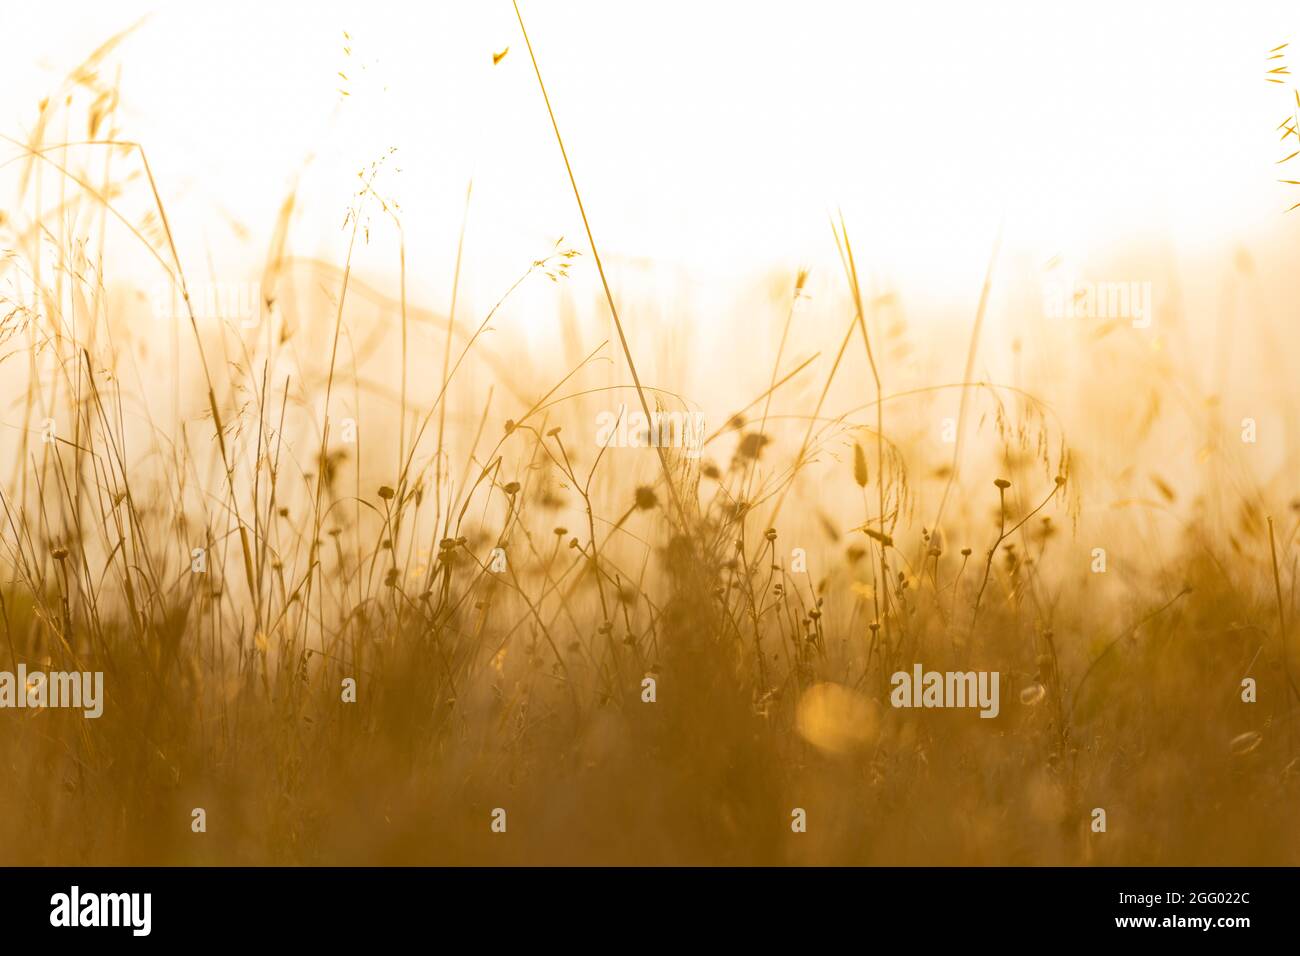 Soft focus of grass and wild plants illuminated by a golden sunset. Spring, summer season, natural background with copy space. Stock Photo